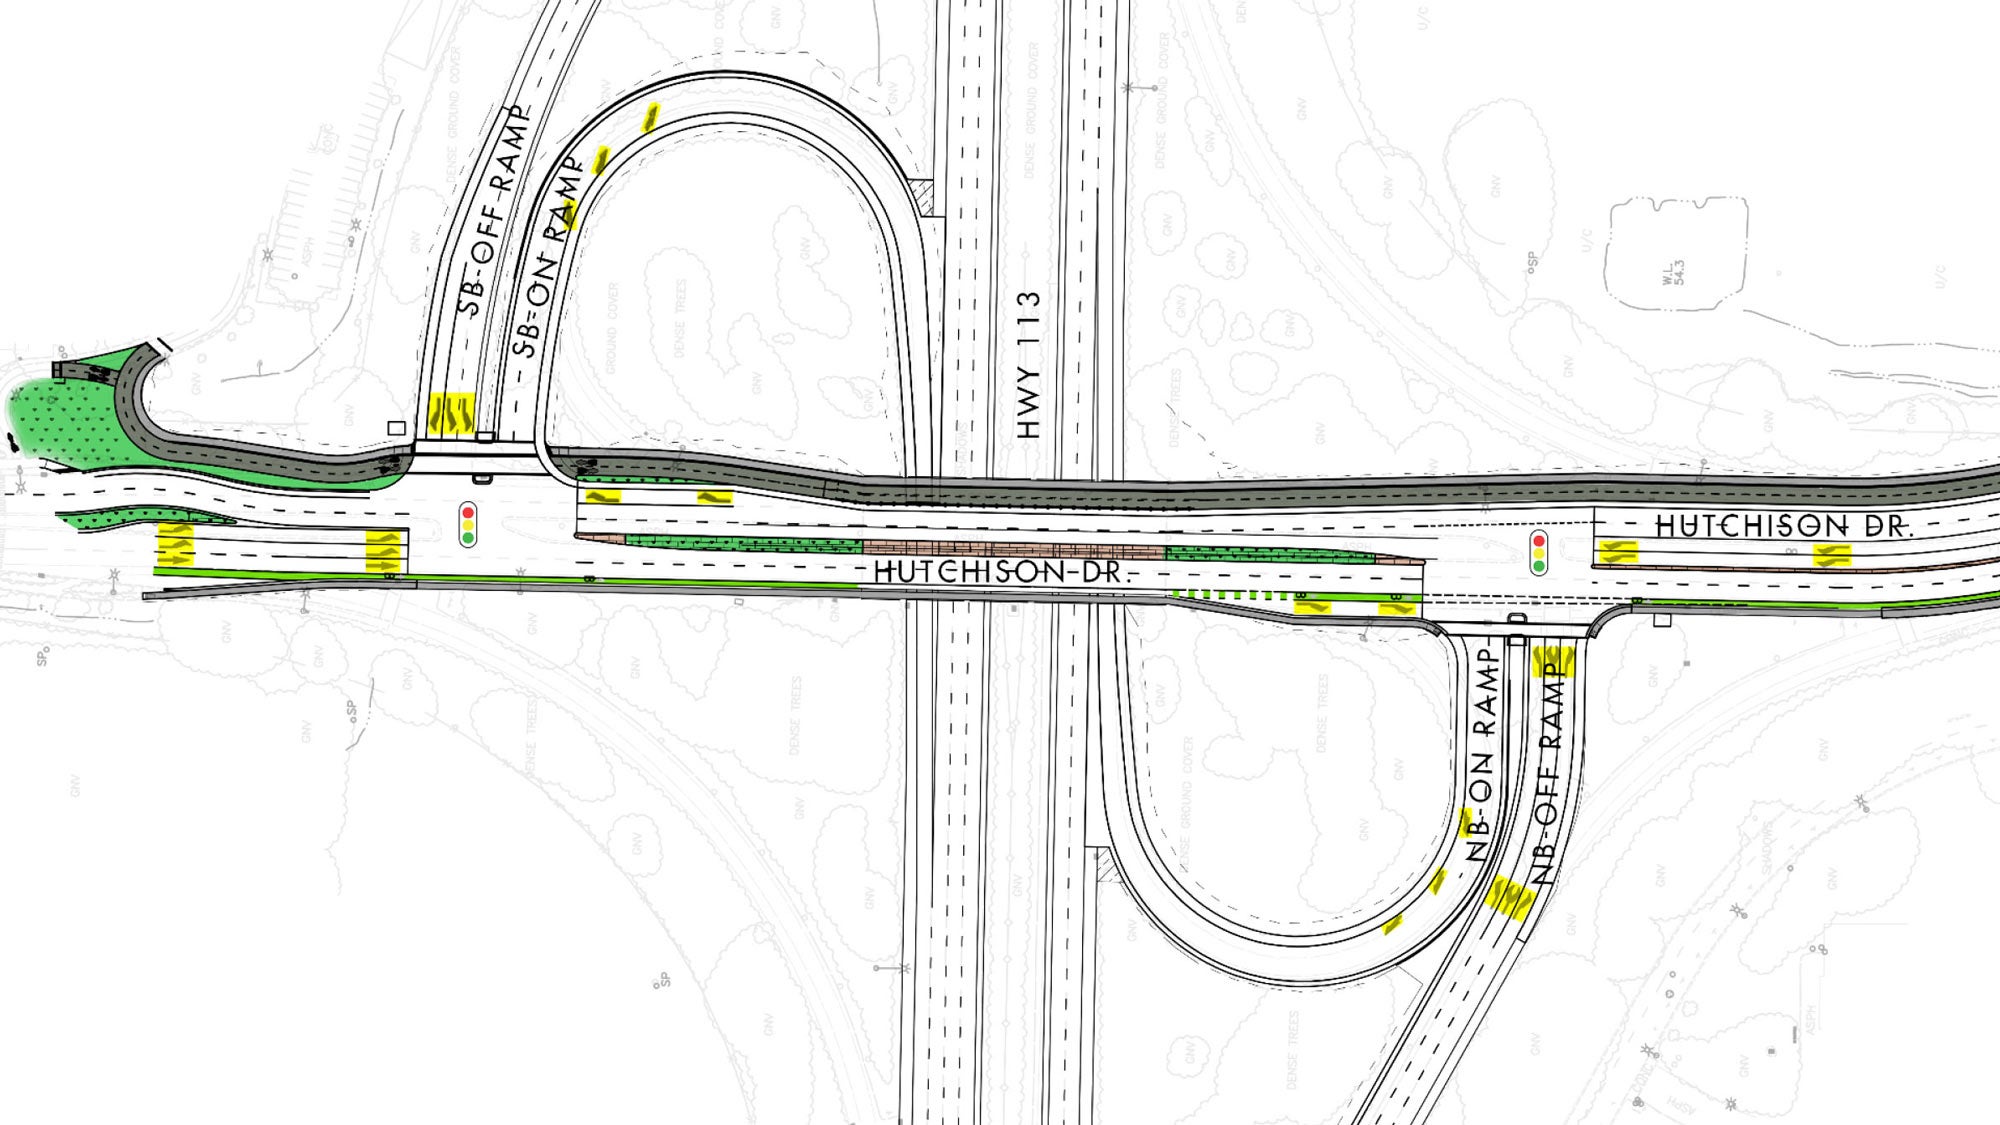 Hutchison Drive drawing shows new ramps and squared intersections.